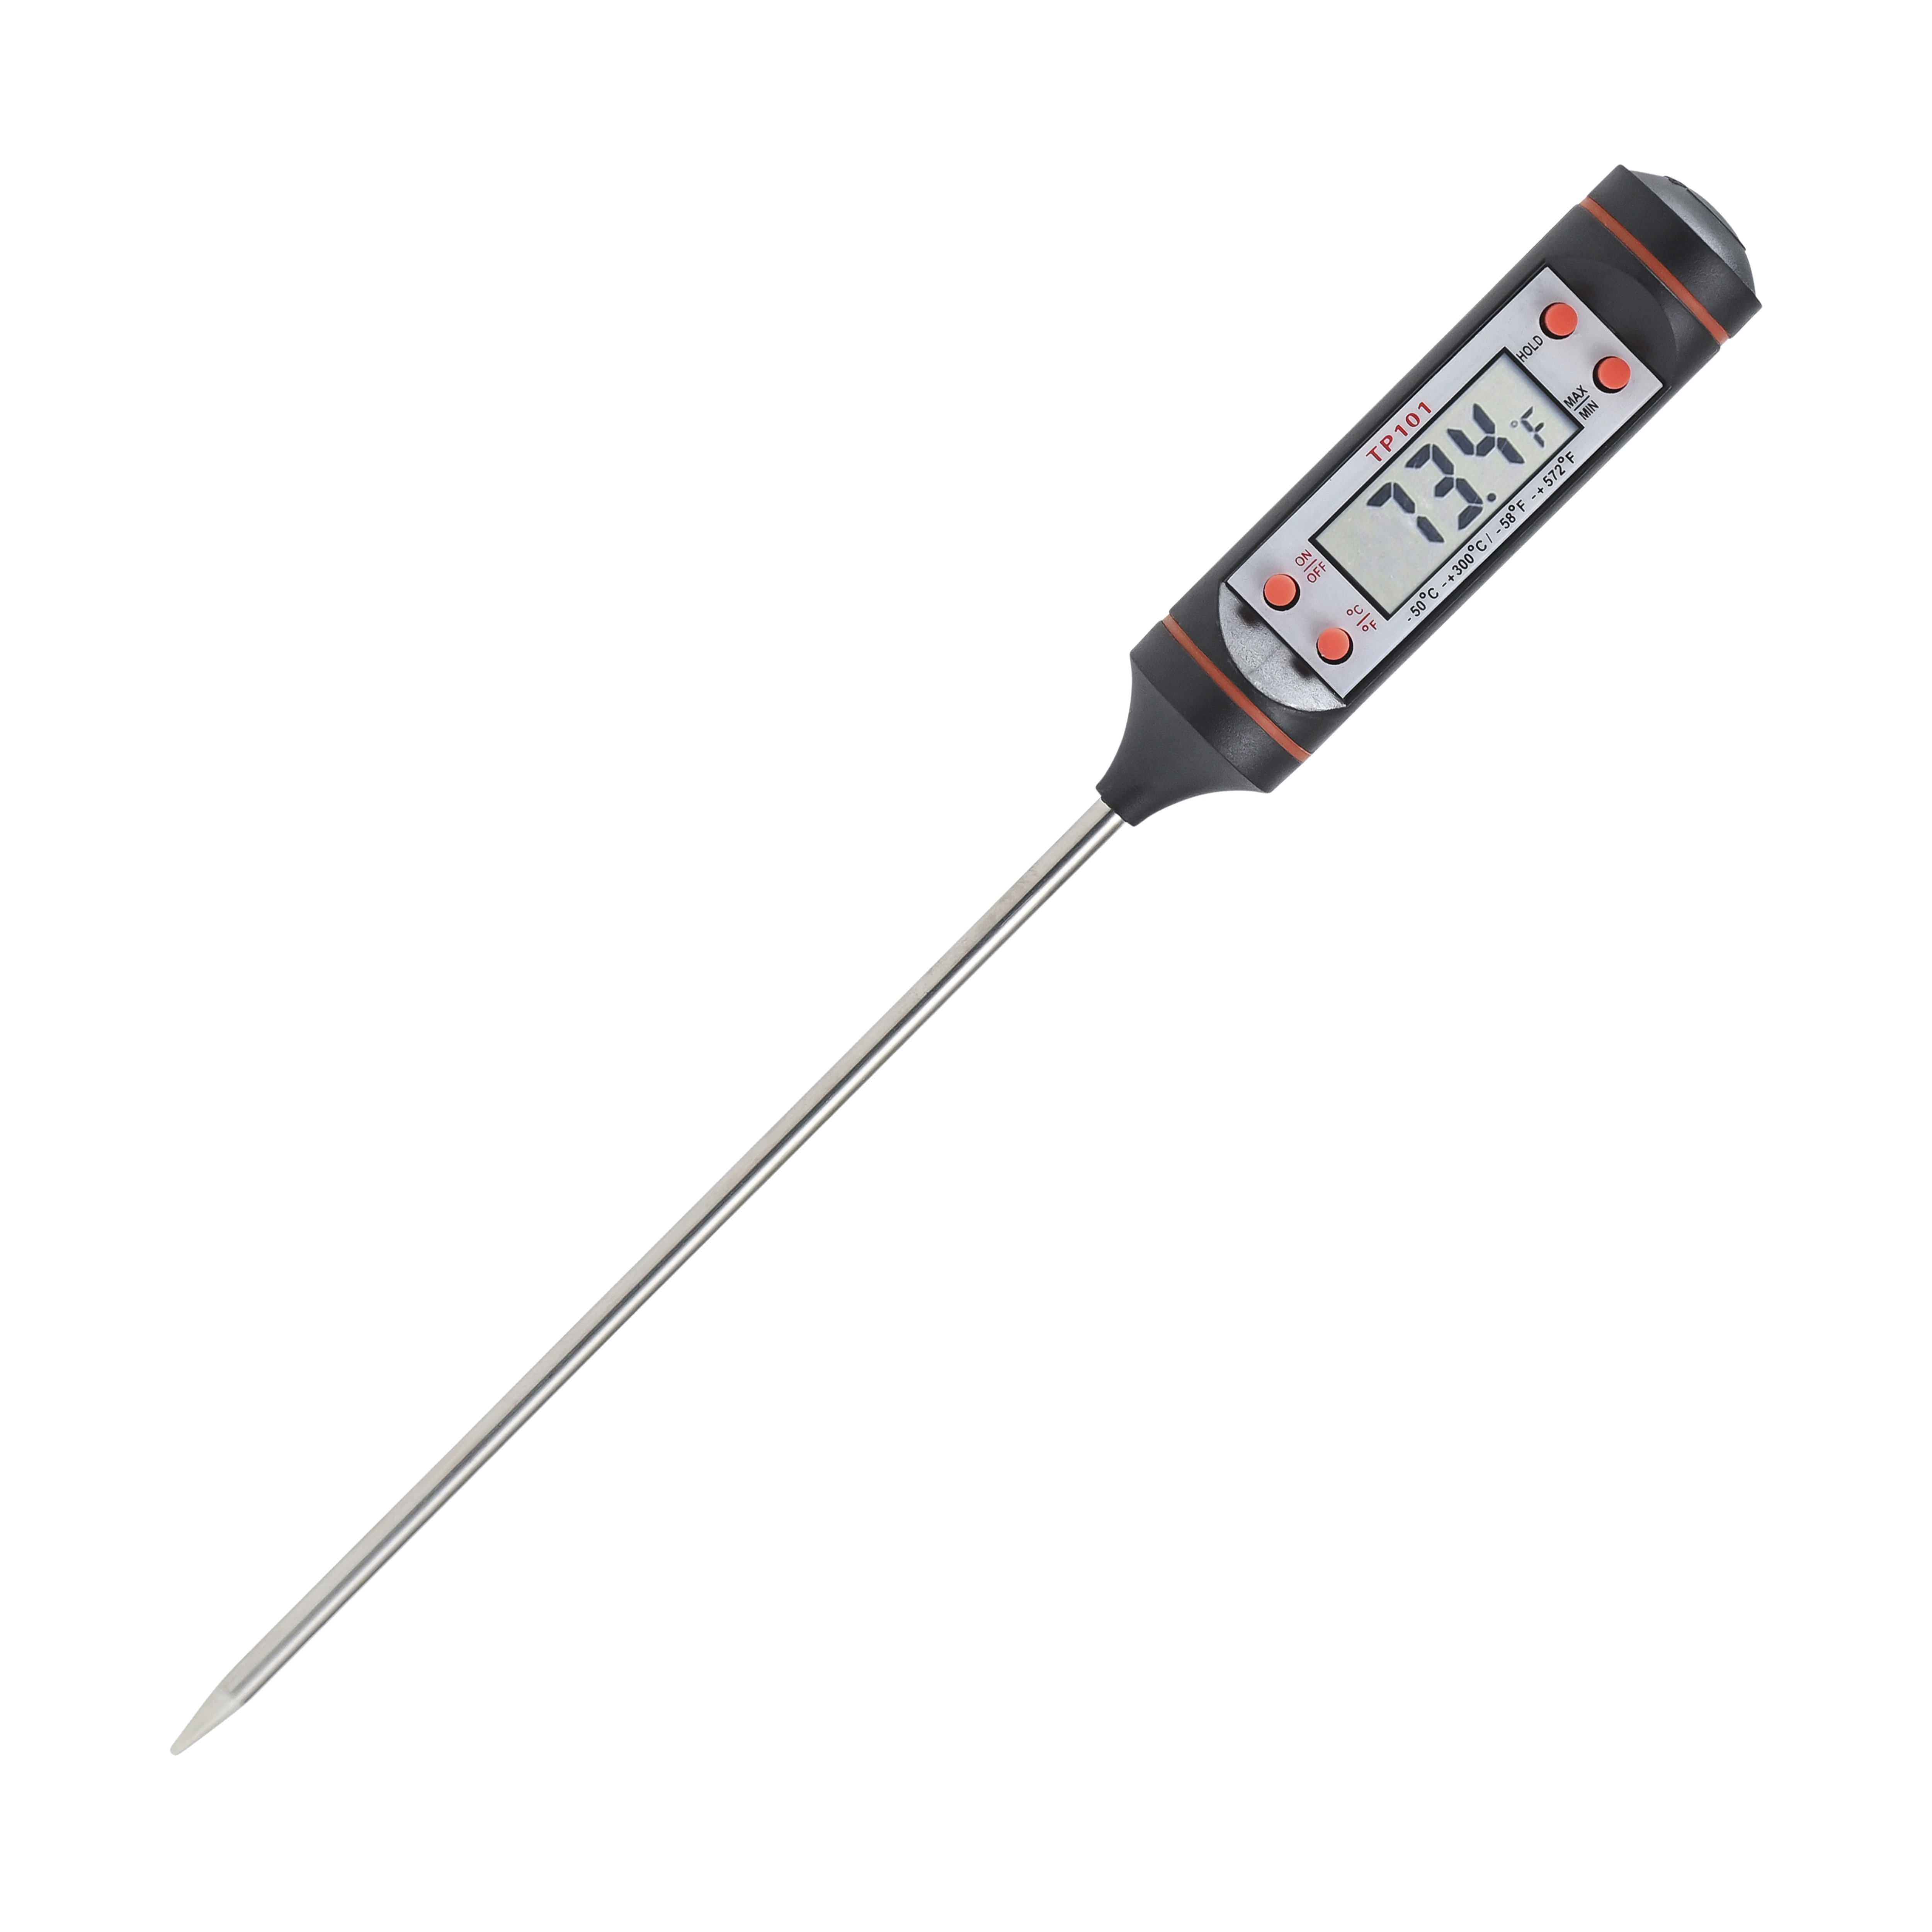 Pro Check Thermometer, Dishwasher Safe, 8 Second Flexible